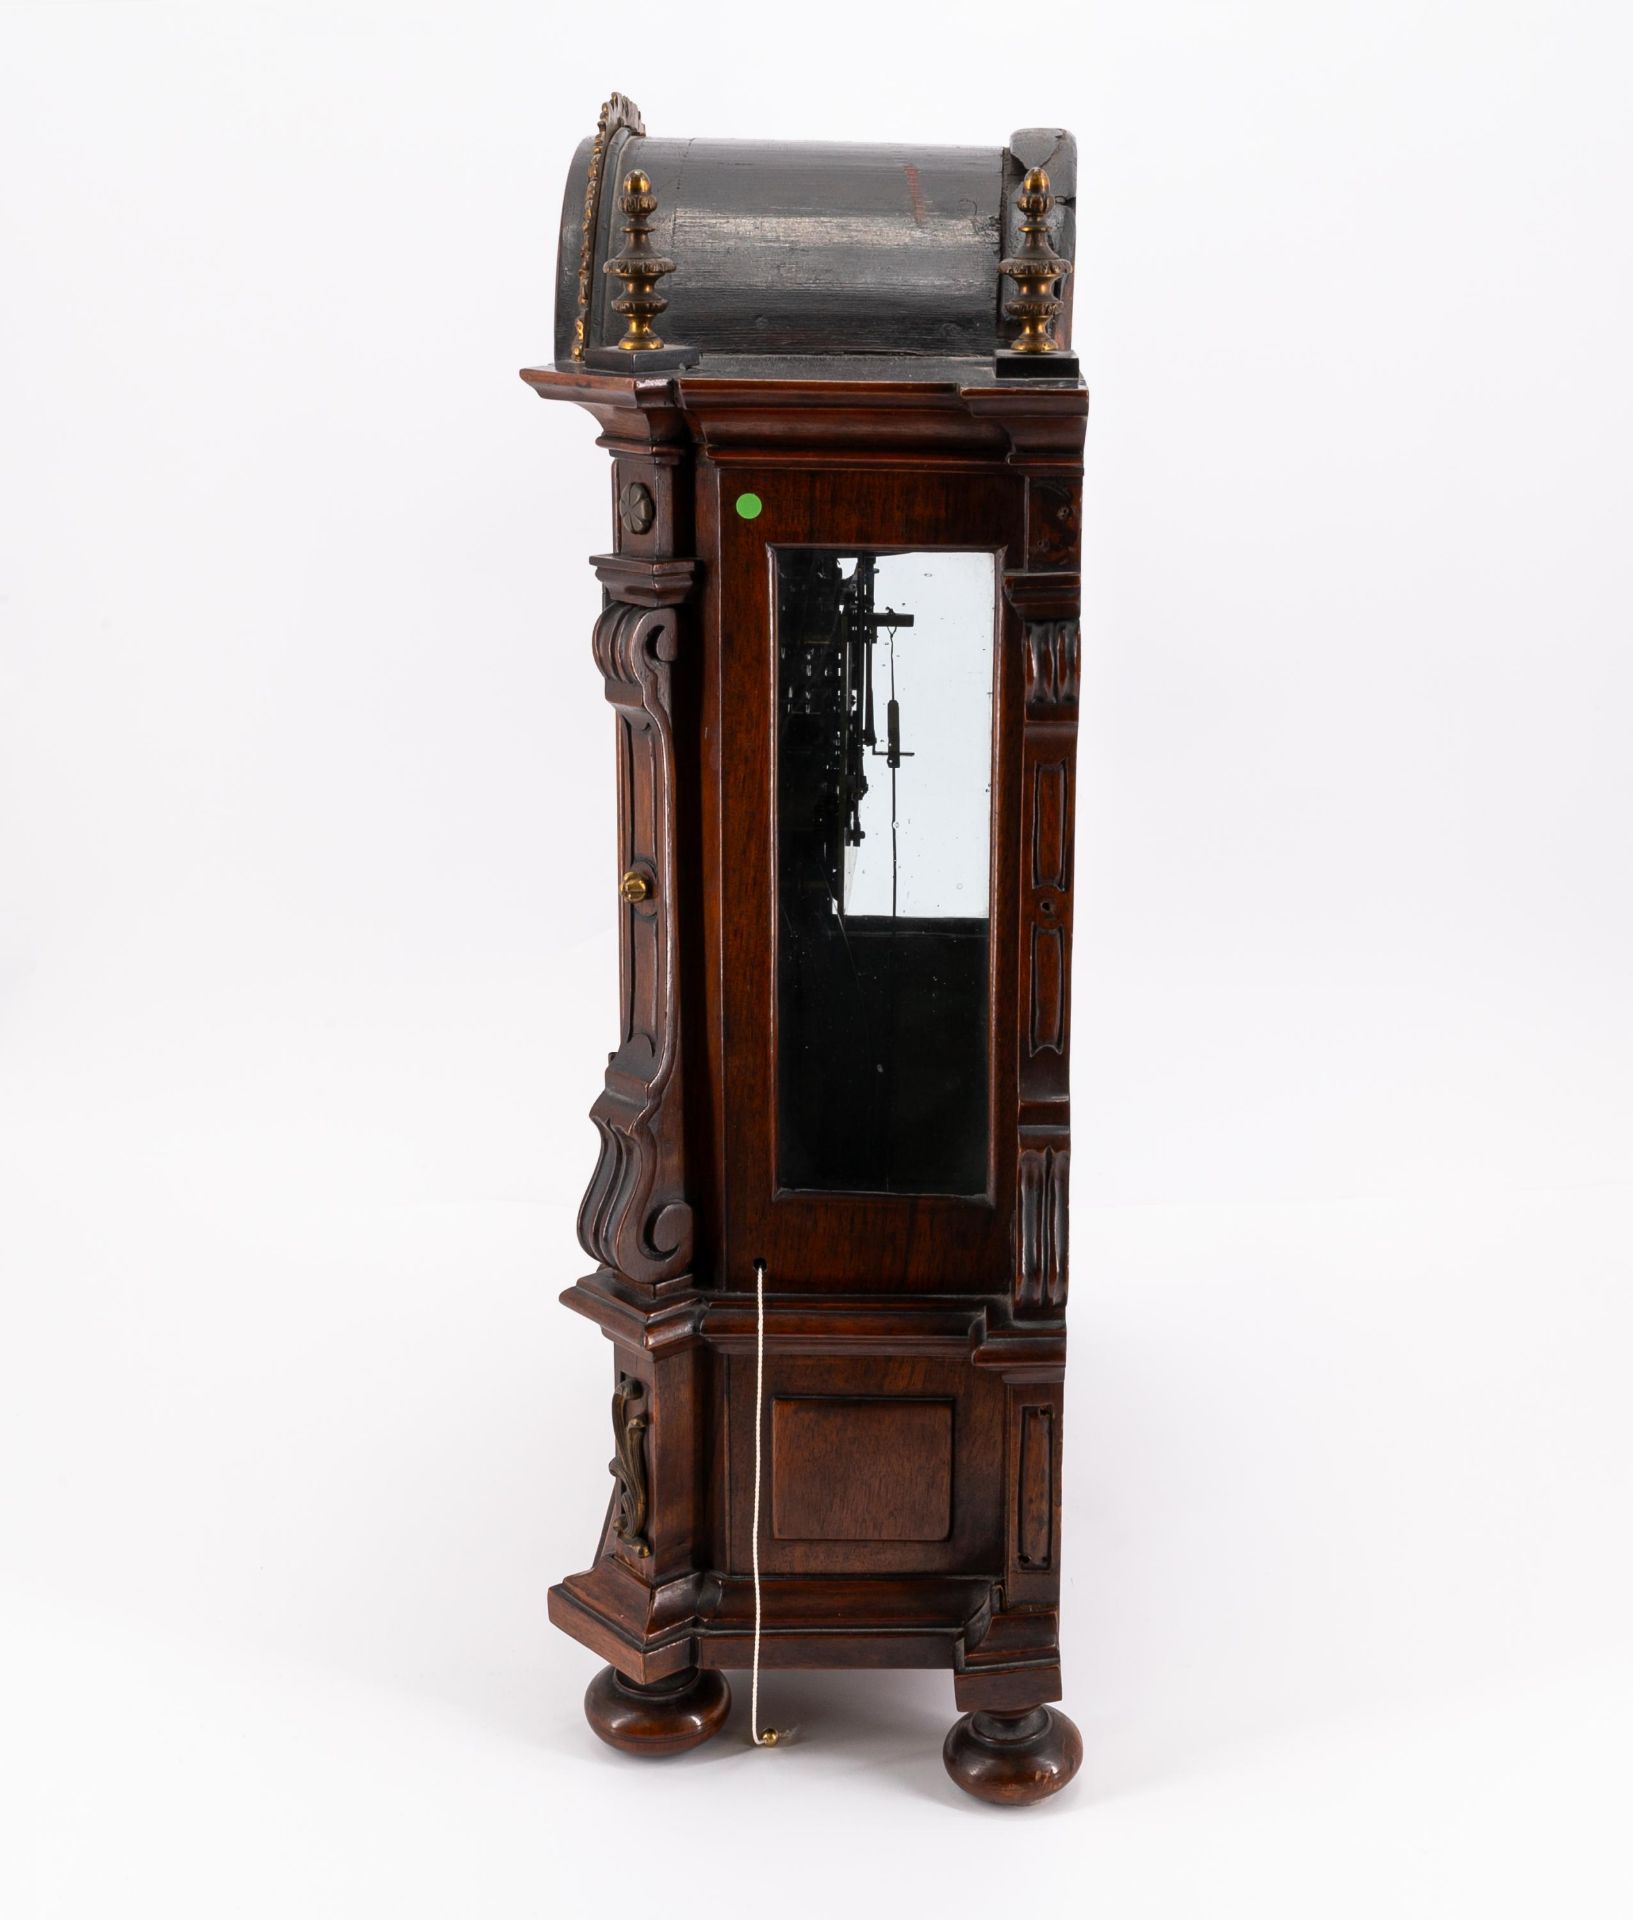 Philipp Kumperger: BRACKET CLOCK WITH MOVING EYE OF GOD MADE OF MAHOGANY, BRONZE, BRASS AND GLASS - Image 2 of 6